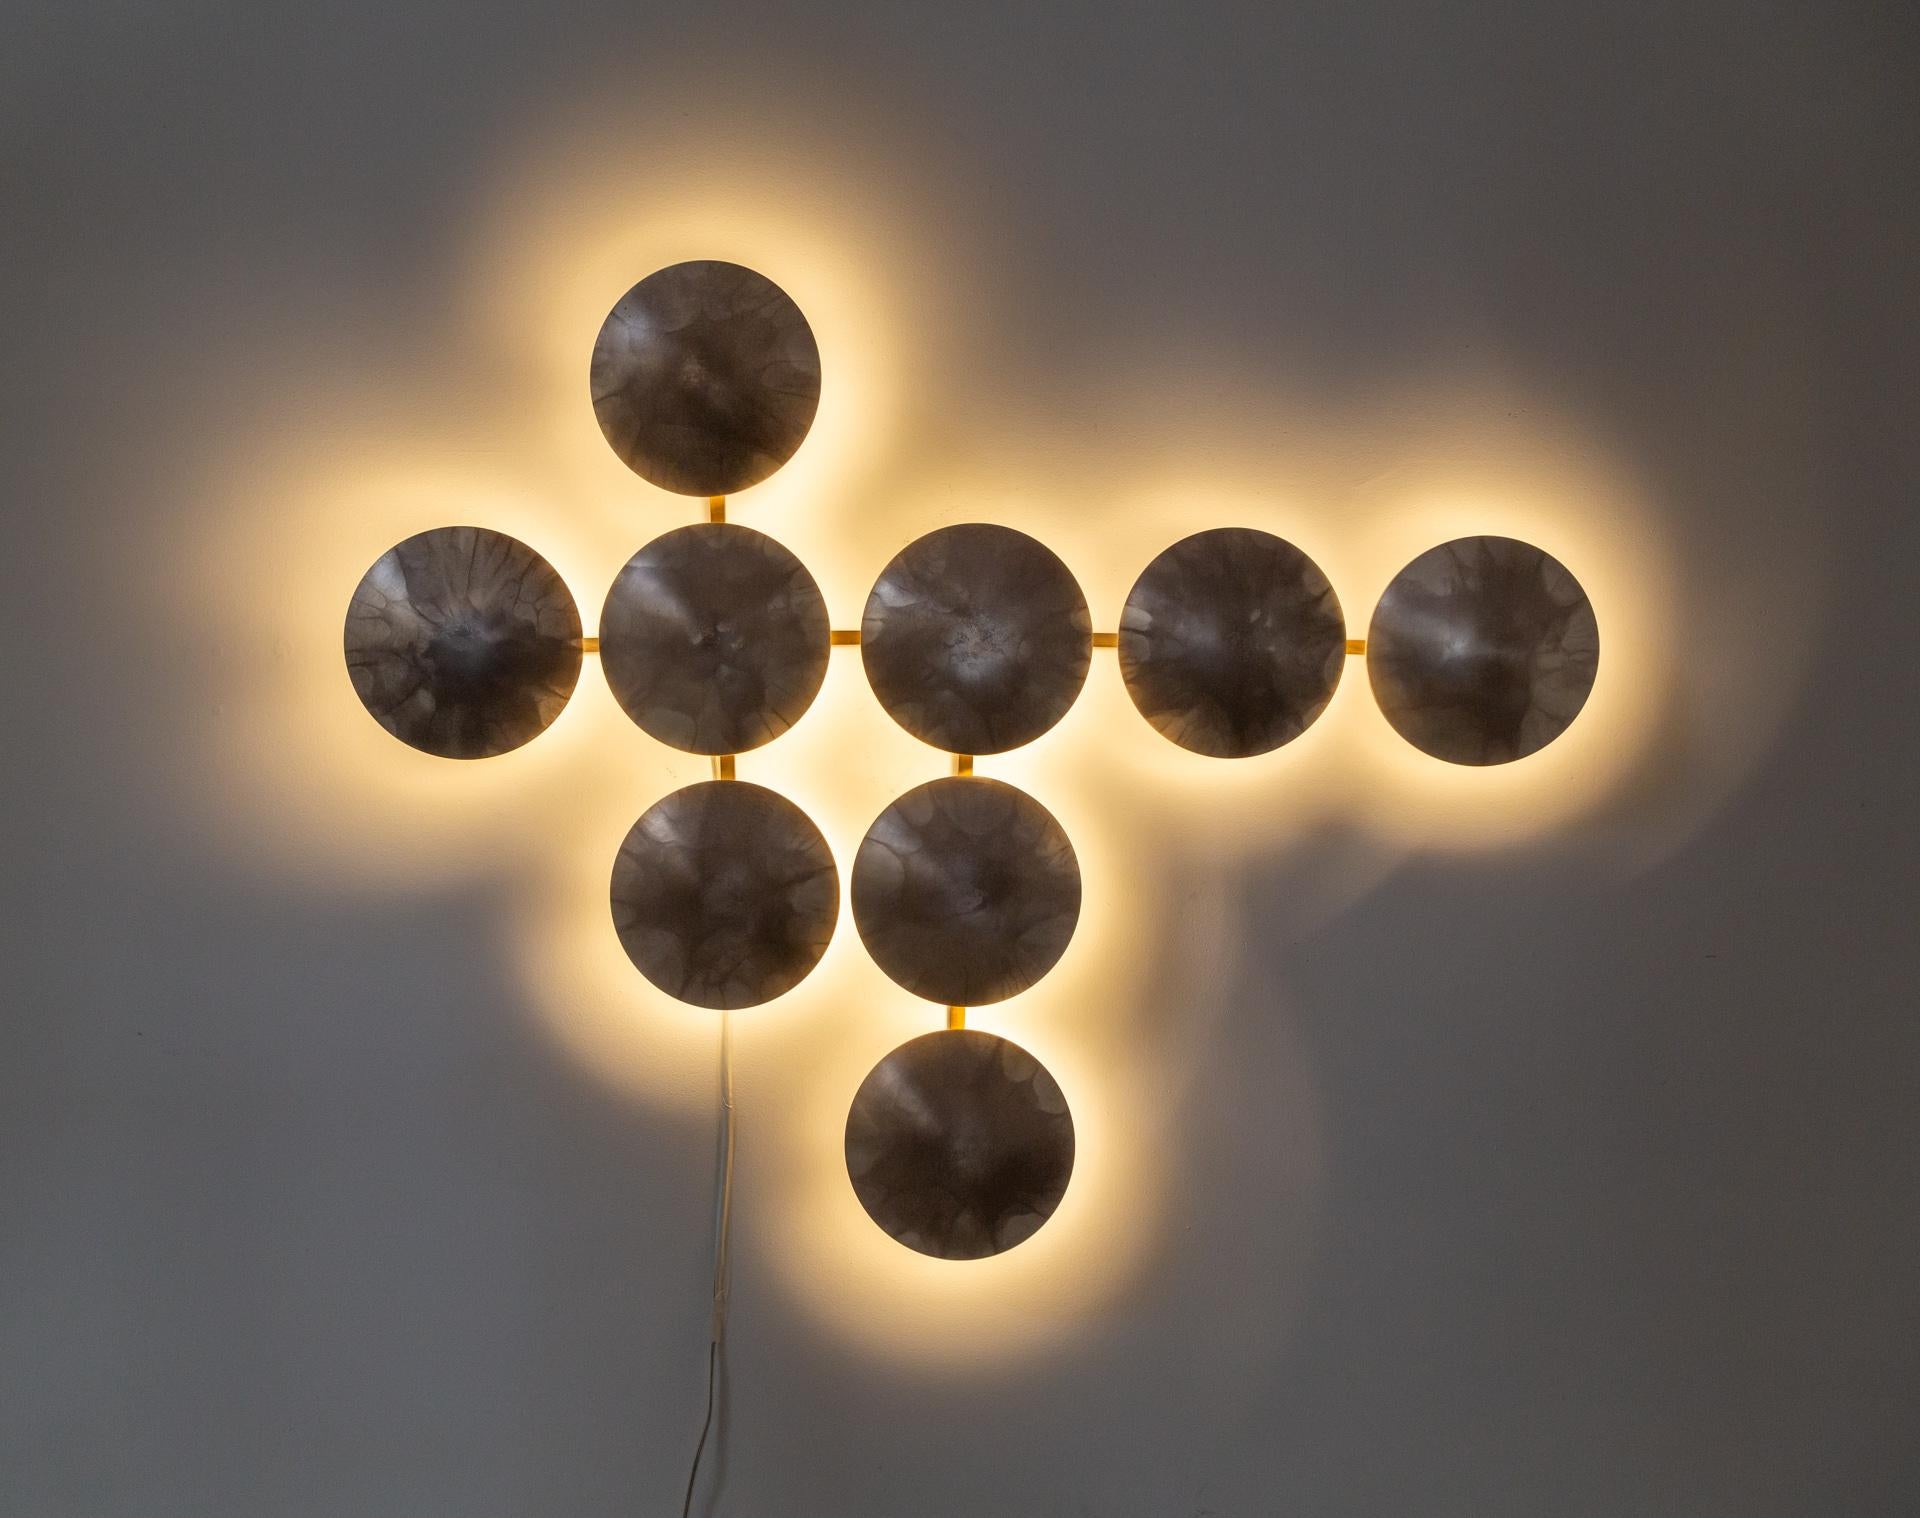 A large backlit sconce comprised of nine burnished, silver-tinted brass convex disks designed by Massimo Castagna and created by Henge. 
It looks like a sculptural wall installation and can be oriented horizontally or vertically.  Made with LED